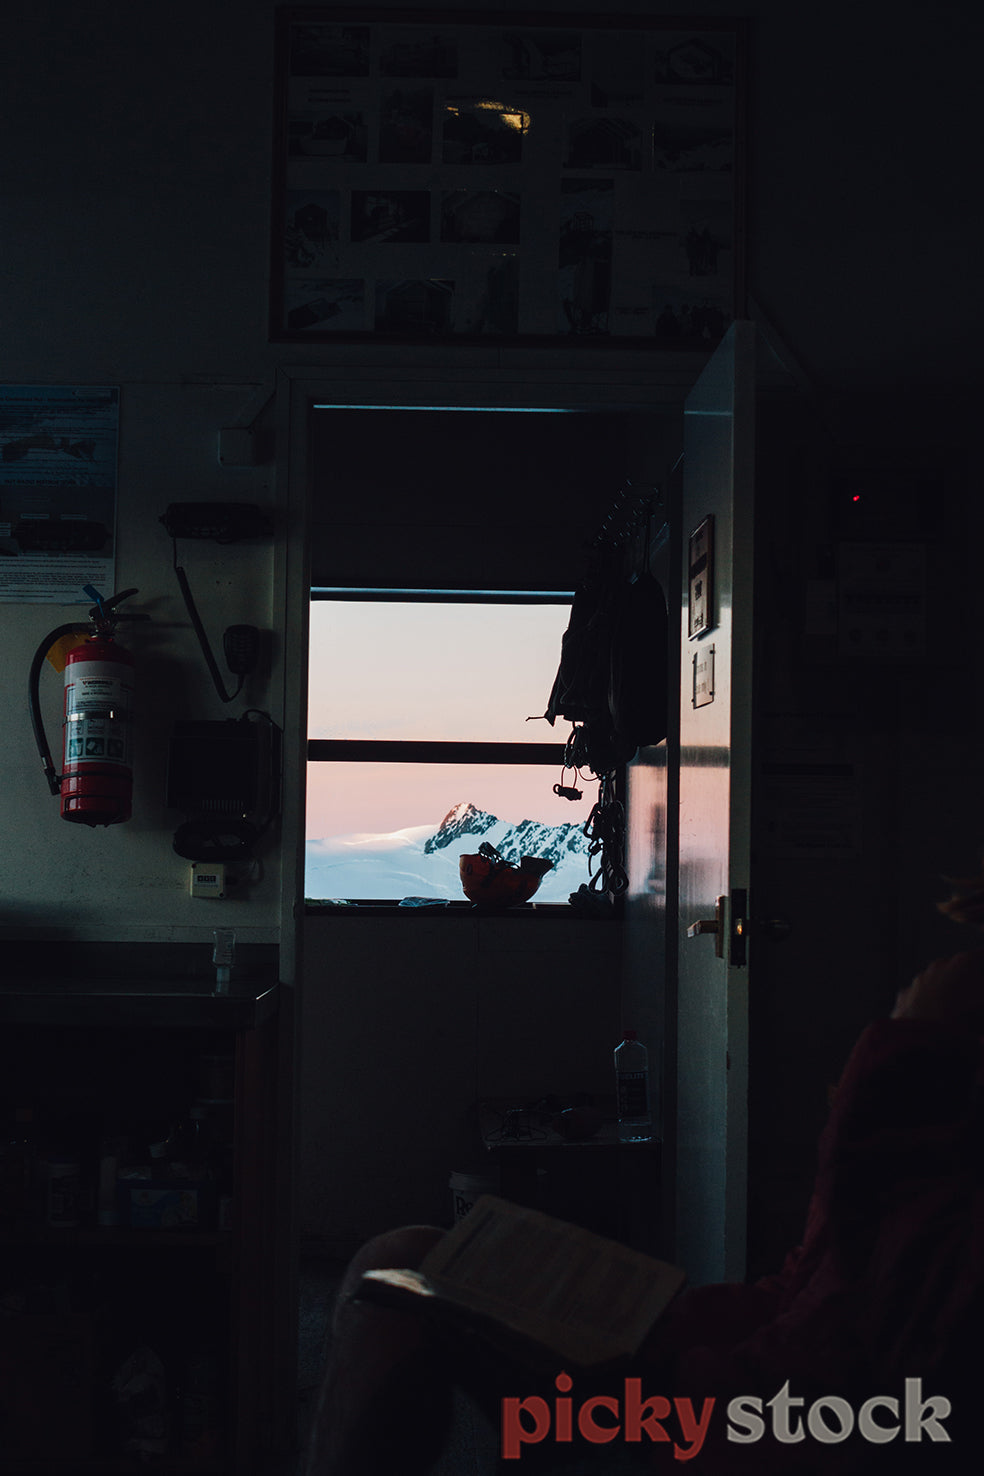 A climbing helmet is outlined on the window sill in a dark alpine hut with mountains glowing in the sunset outside the window.